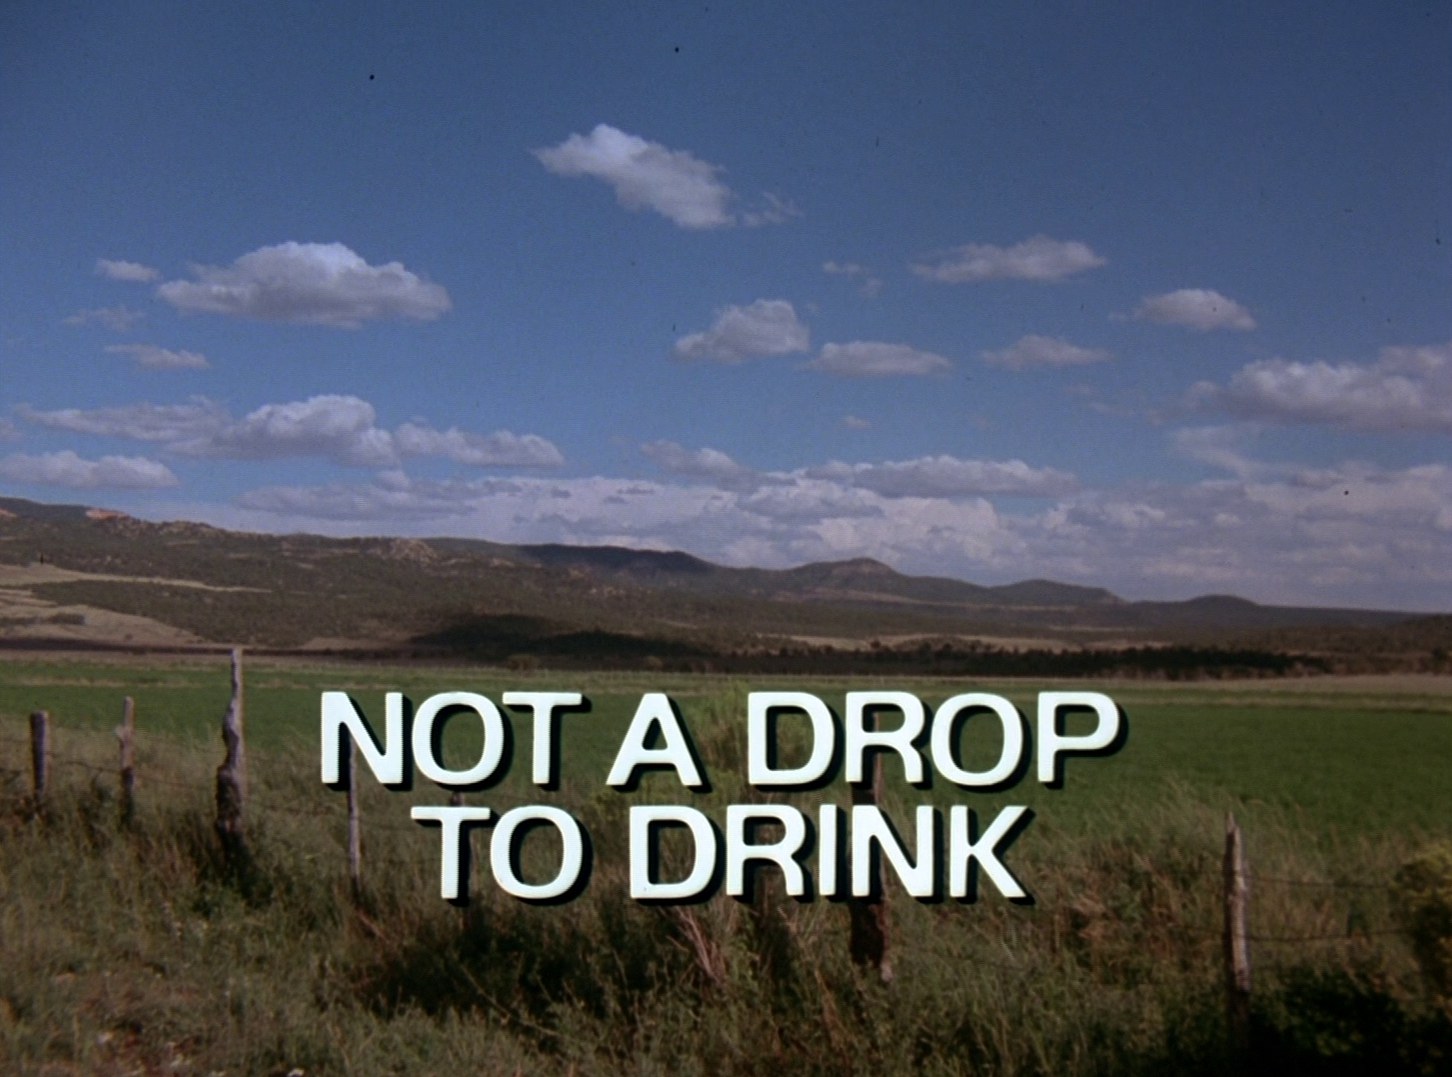 Knight Rider Season 1 - Episode 6 - Not A Drop To Drink - Photo 9